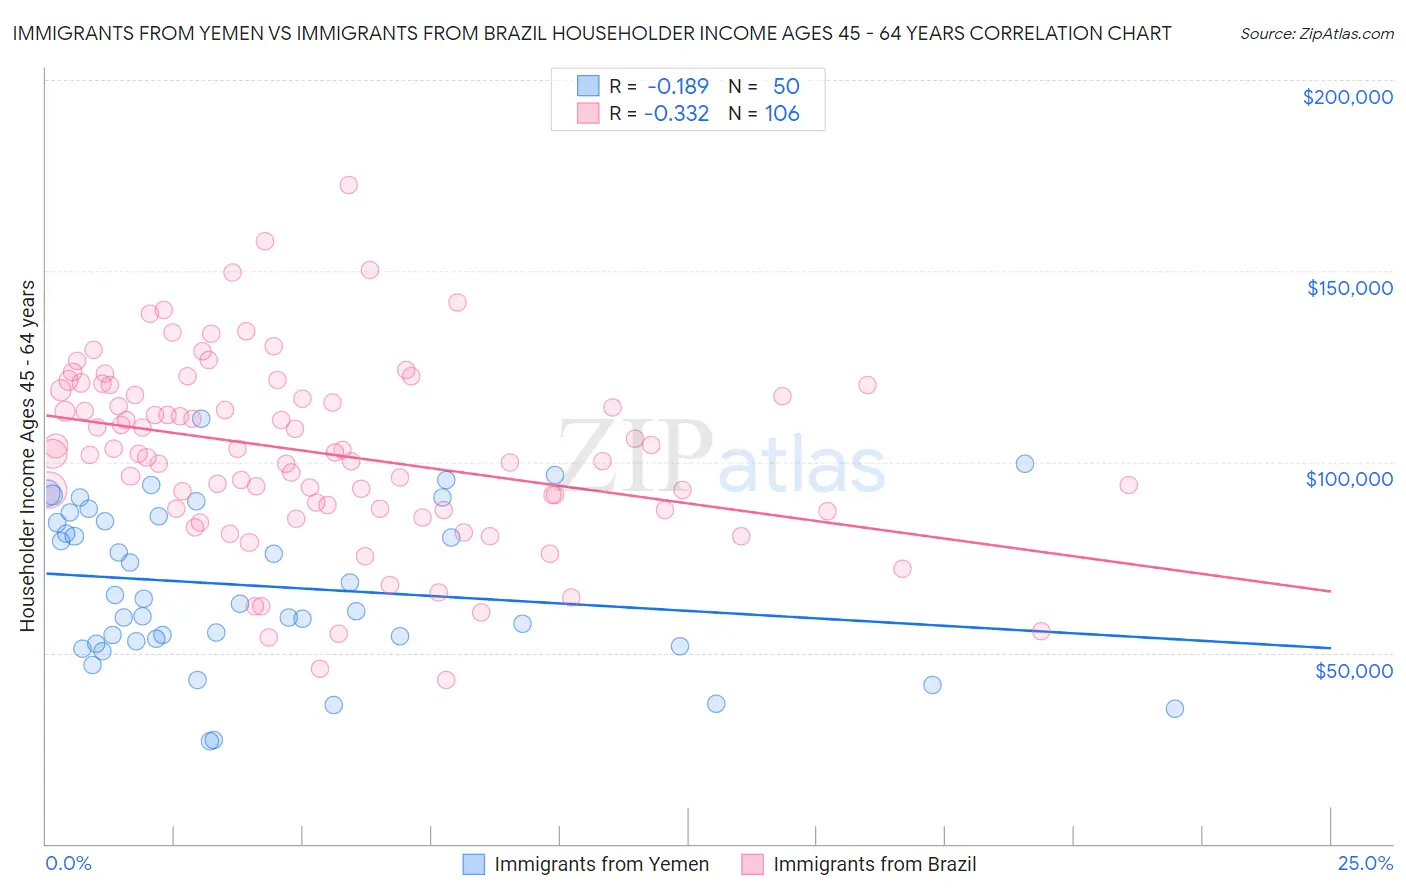 Immigrants from Yemen vs Immigrants from Brazil Householder Income Ages 45 - 64 years